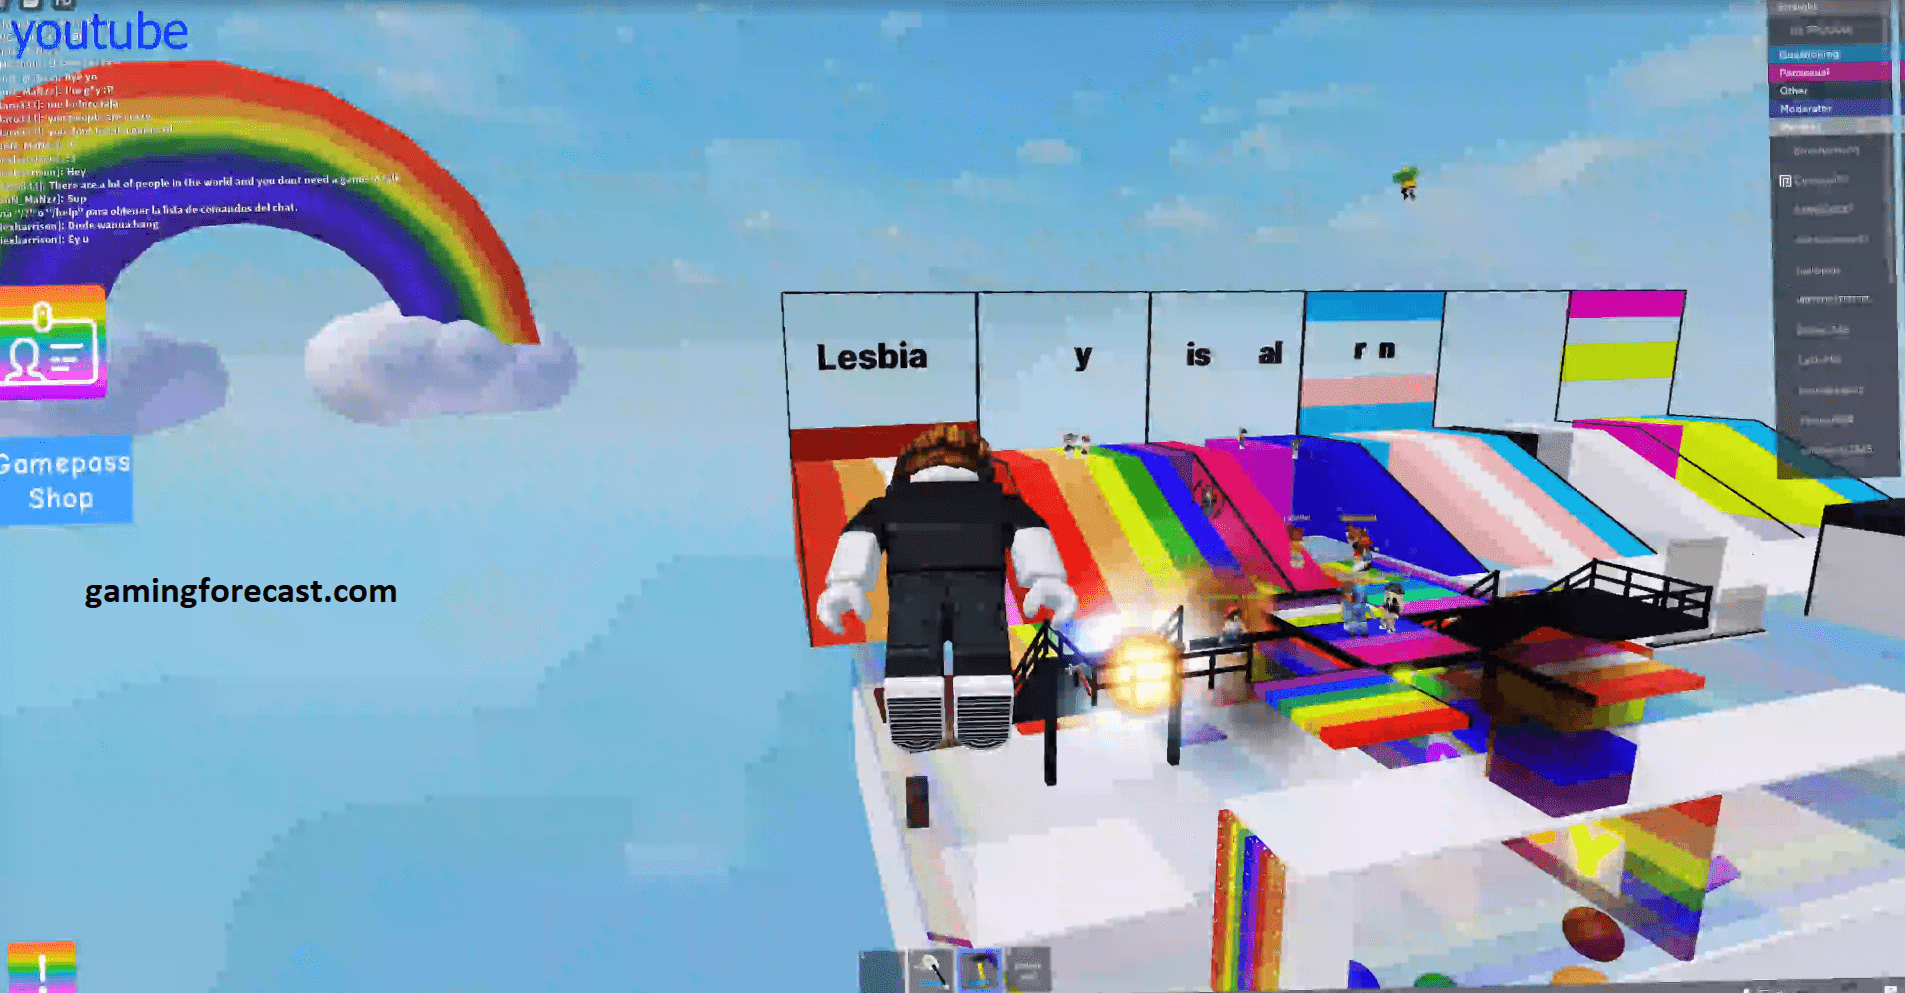 Roblox Hack Download Pc Destroy Lobby Fly Aimbot Scripts 2021 Gaming Forecast Download Free Online Game Hacks - roblox unpatched dll hacks